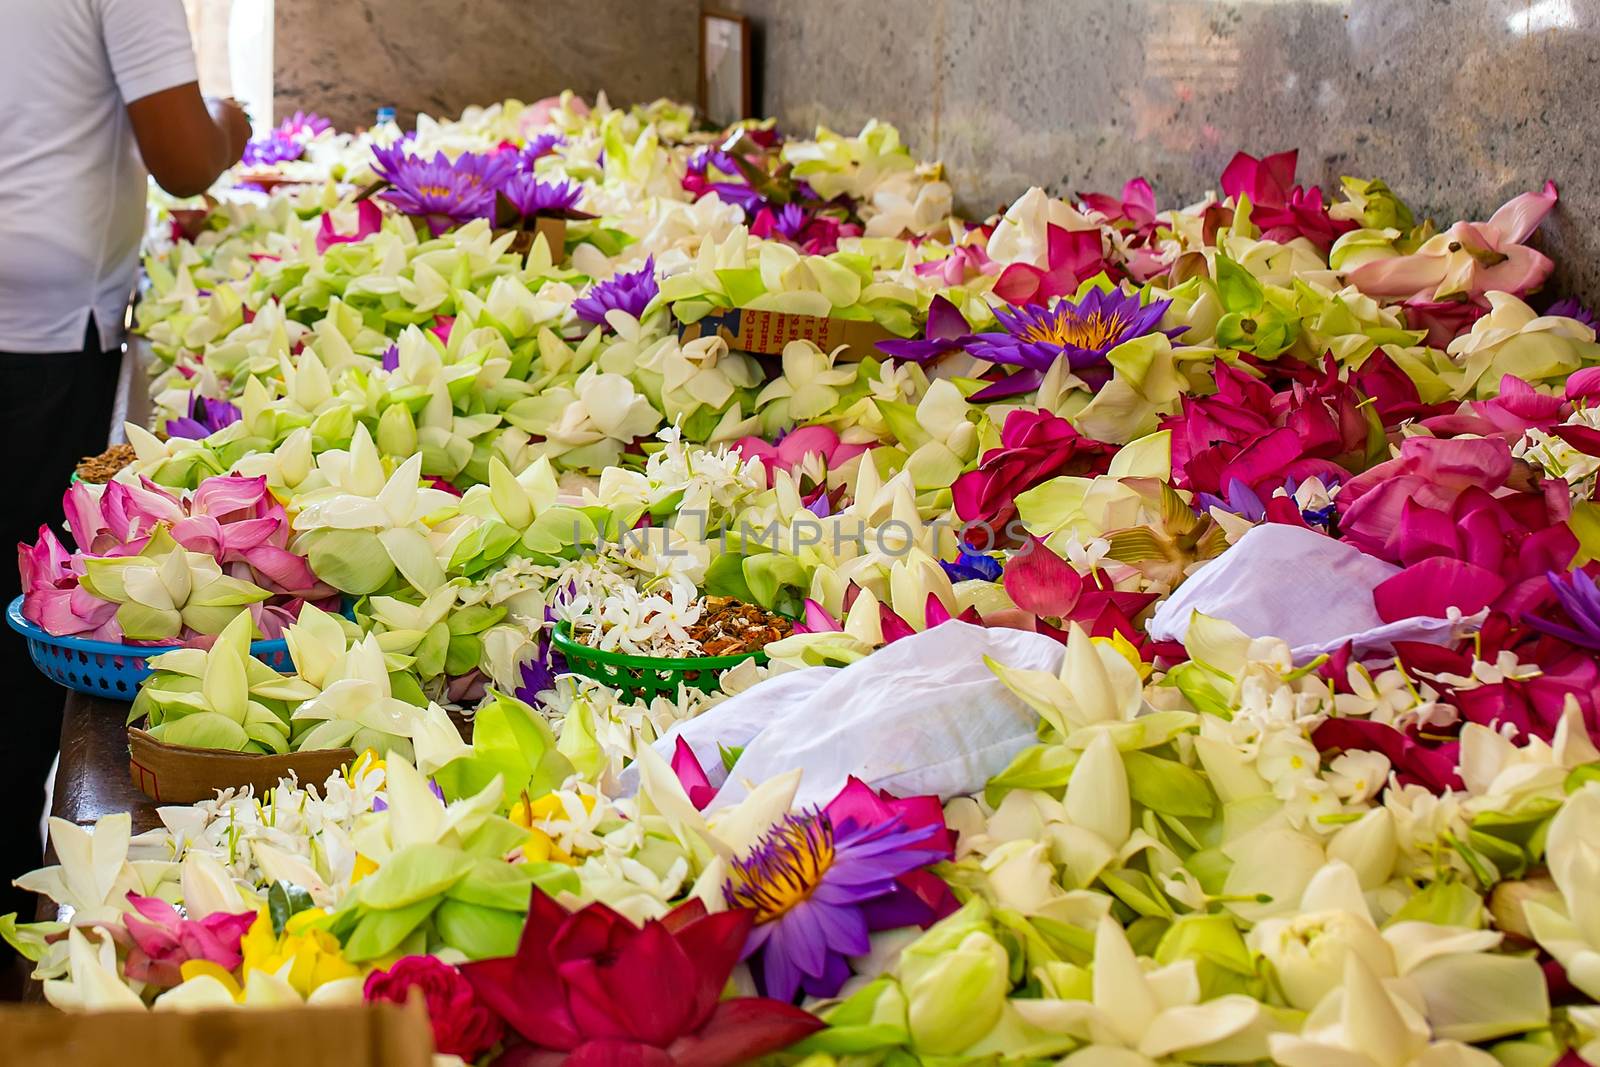 close-up Flowers in a Buddhist temple. Colorful flower offerings to Buddha inside temple of the sacred Bodhi Tree in Anuradhapura, Sri Lanka. The act of worship and a part of Buddhist praying ceremony